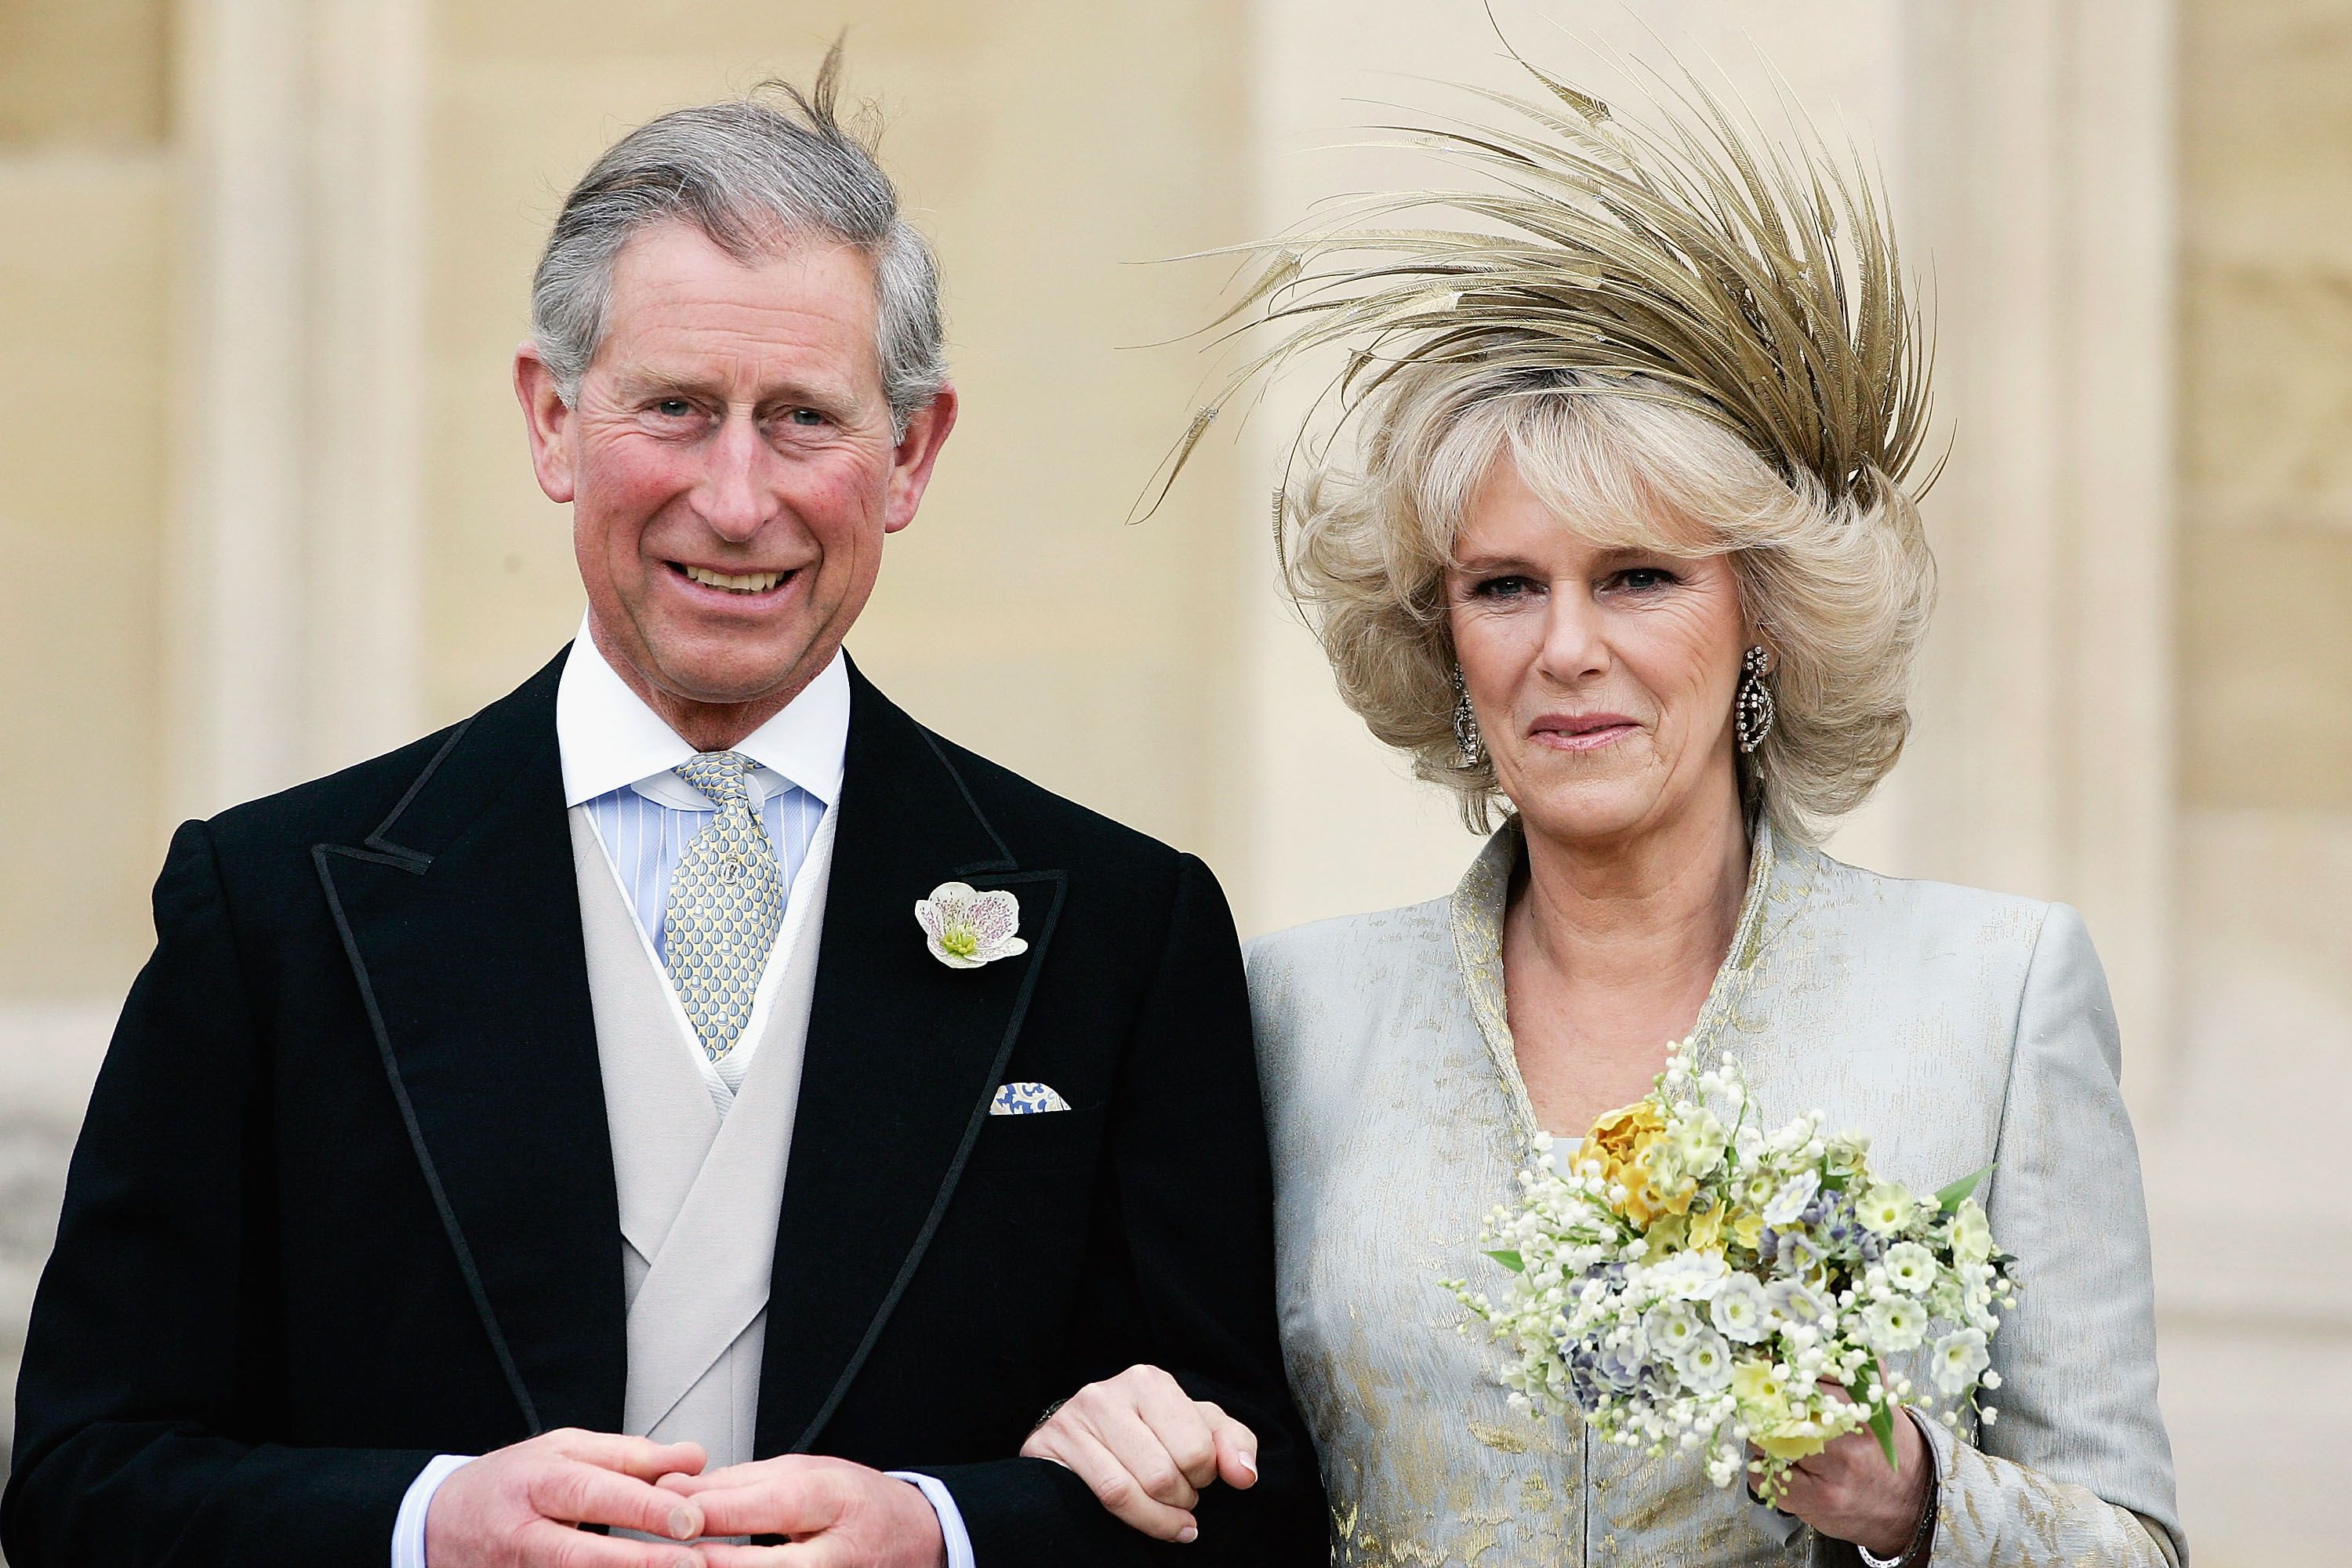 Prince Charles and Duchess Camilla leave the Service of Prayer and Dedication blessing at their marriage on April 9, 2005, in Berkshire, England | Photo: Tim Graham Photo Library/Getty Images